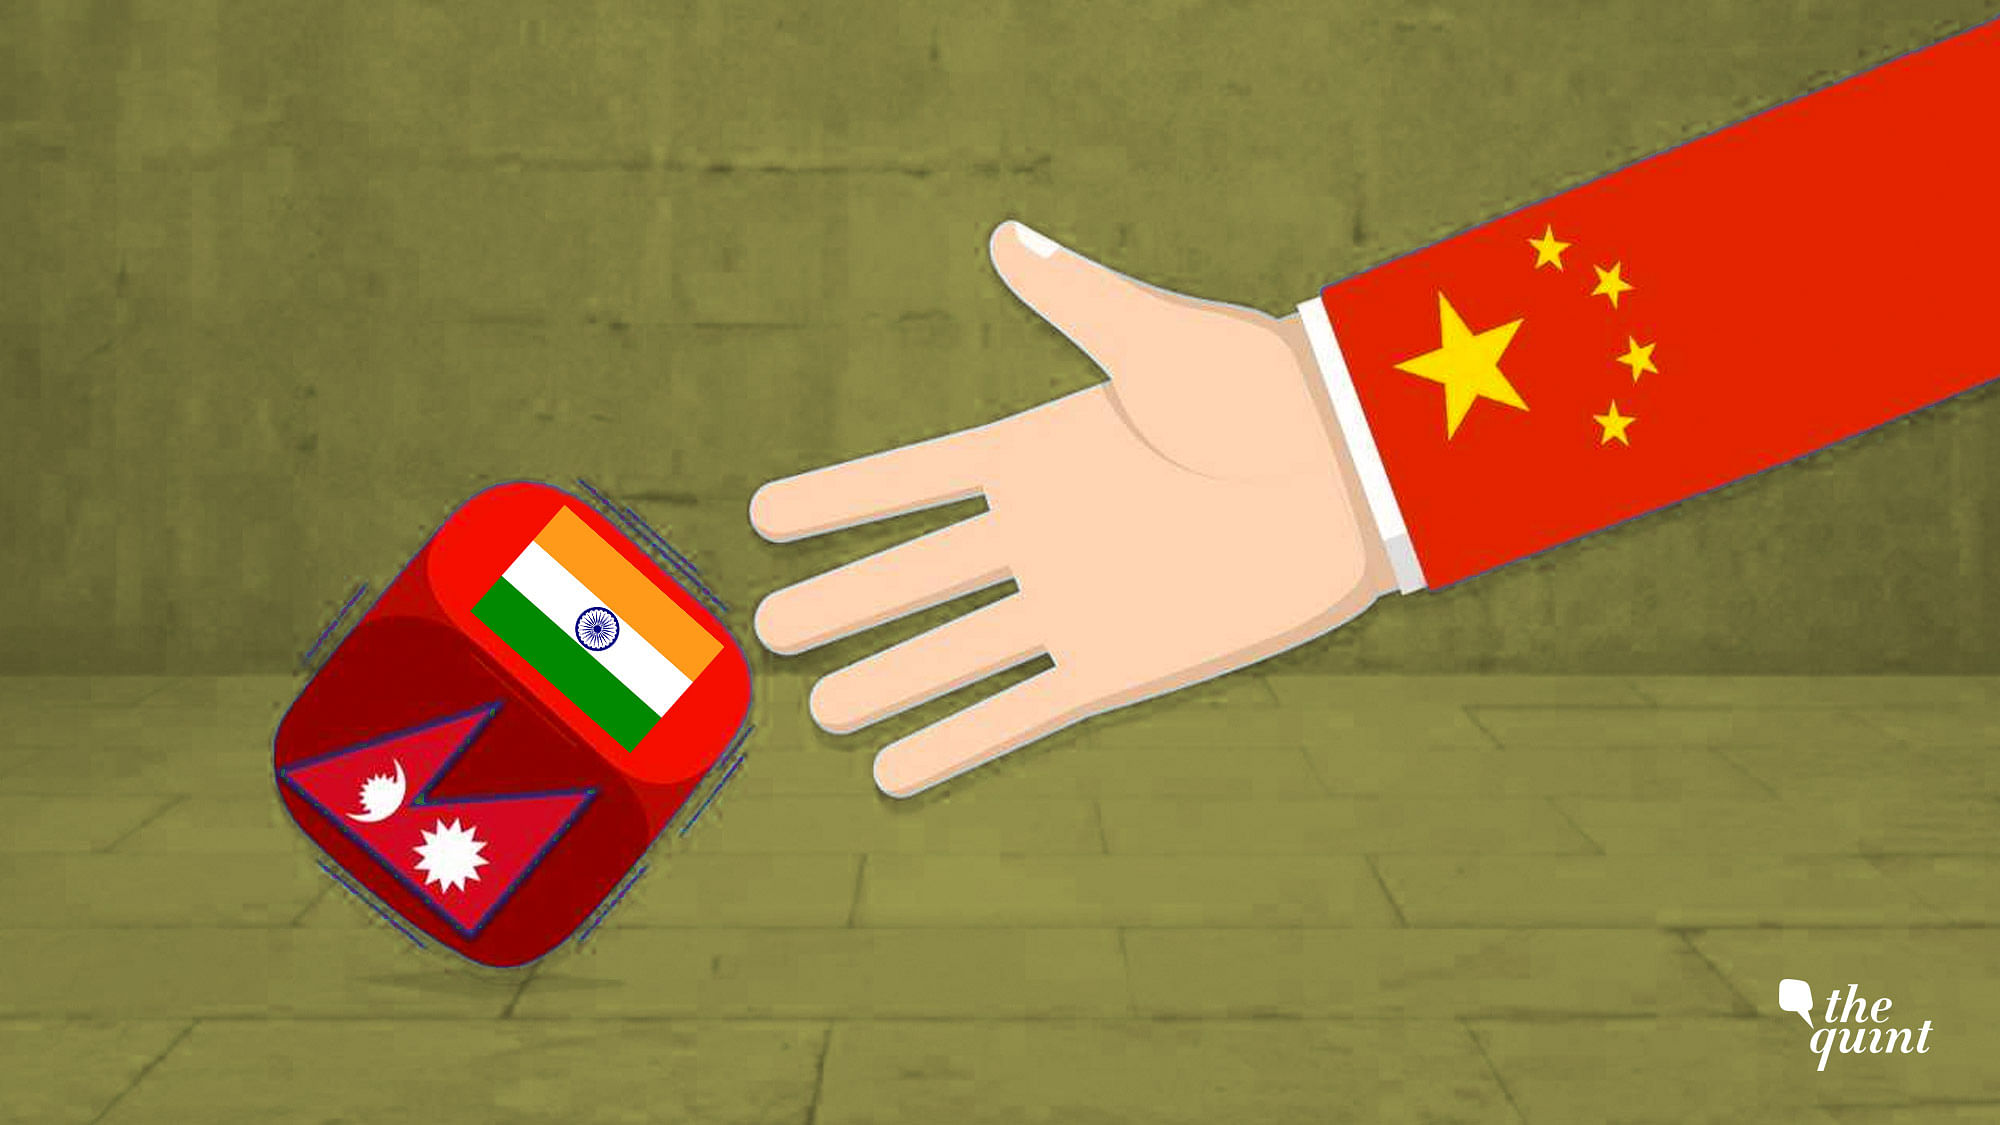 Image of Chinese flag (right), India and Nepal’s flags (on either sides of the dice), used for representational purposes.